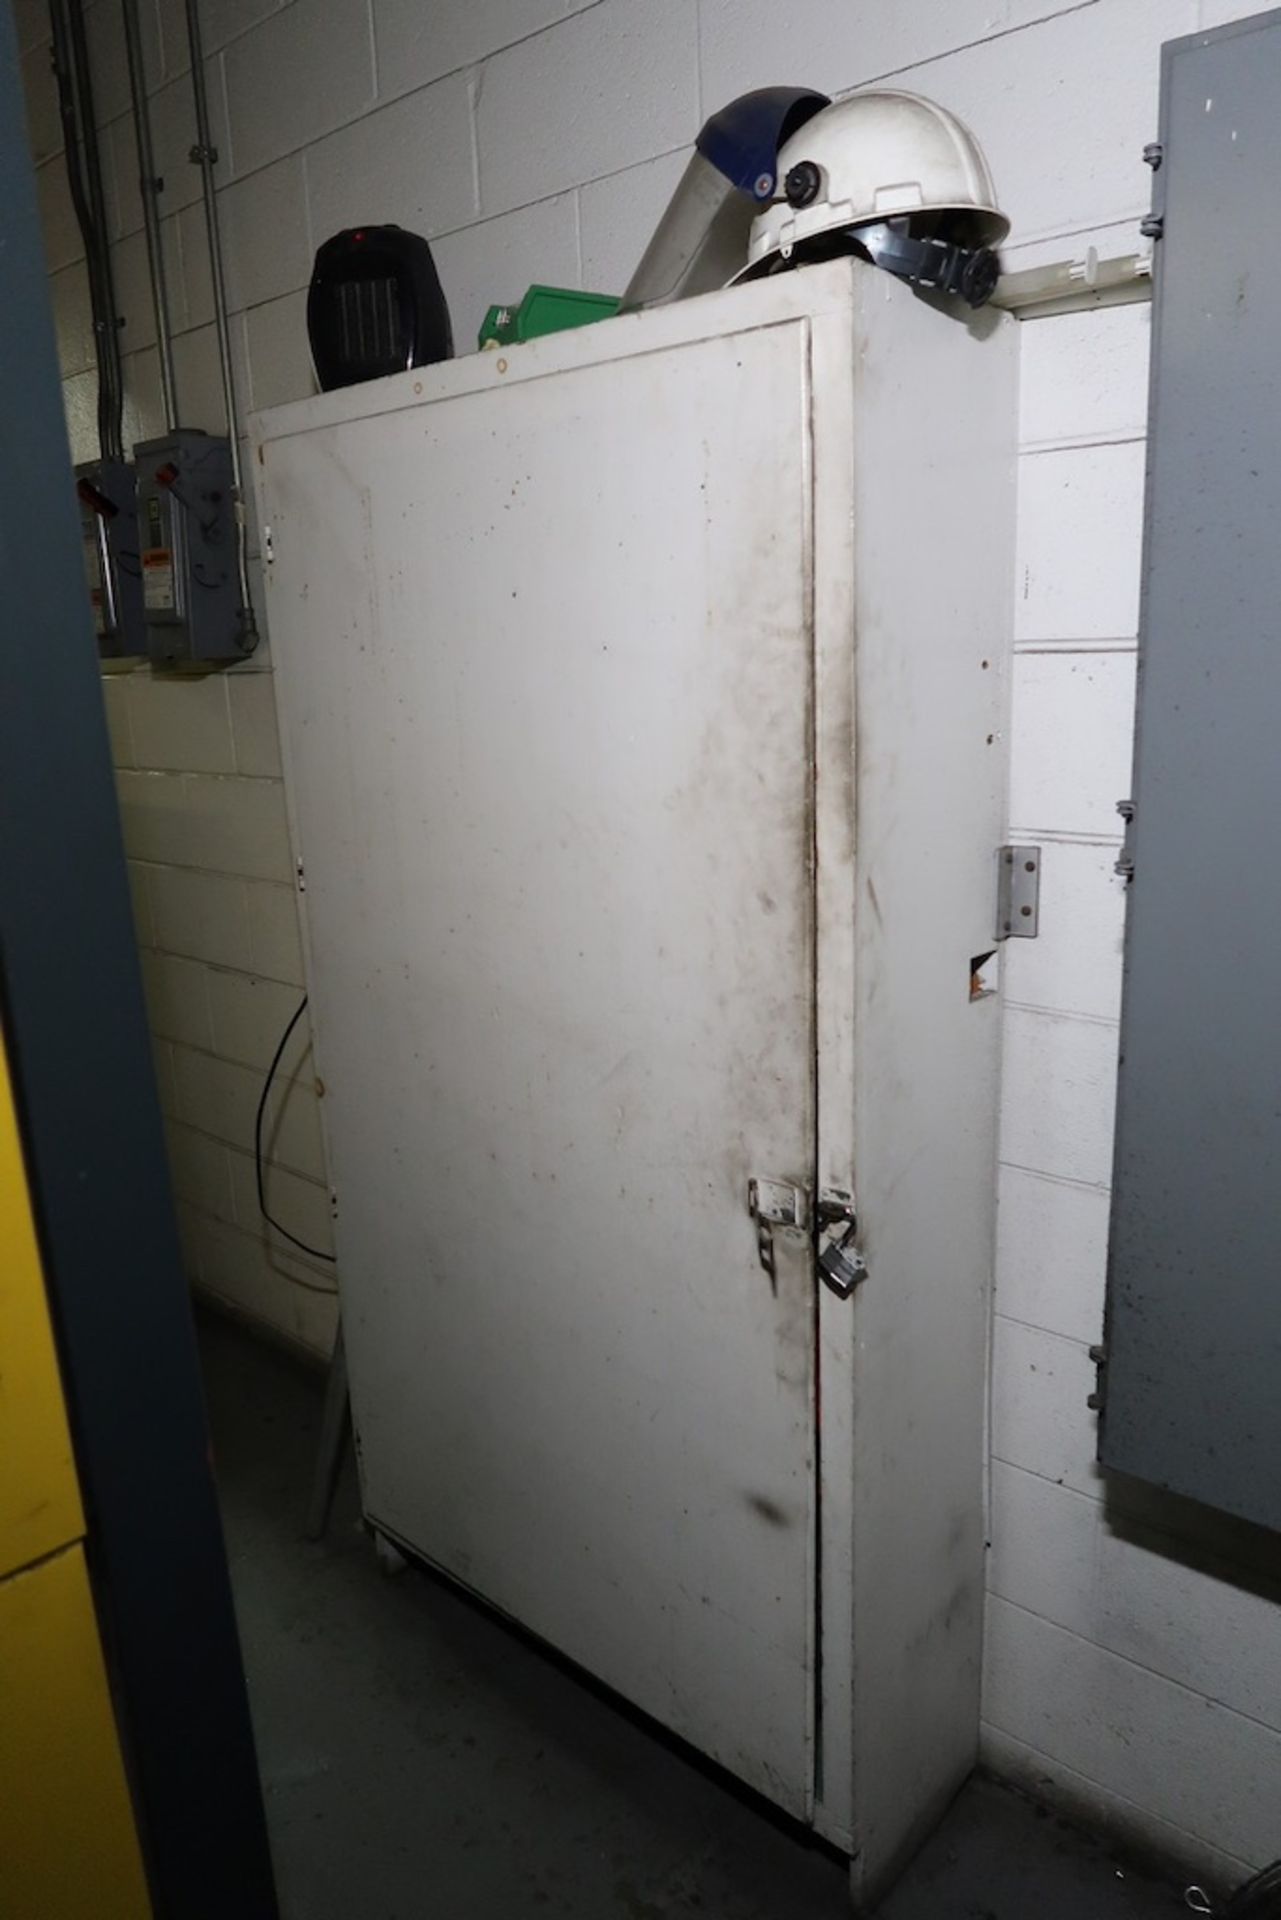 Remaining Contents of Compressor Room, to Include Desks, Cabinets, Etc. - Image 6 of 21